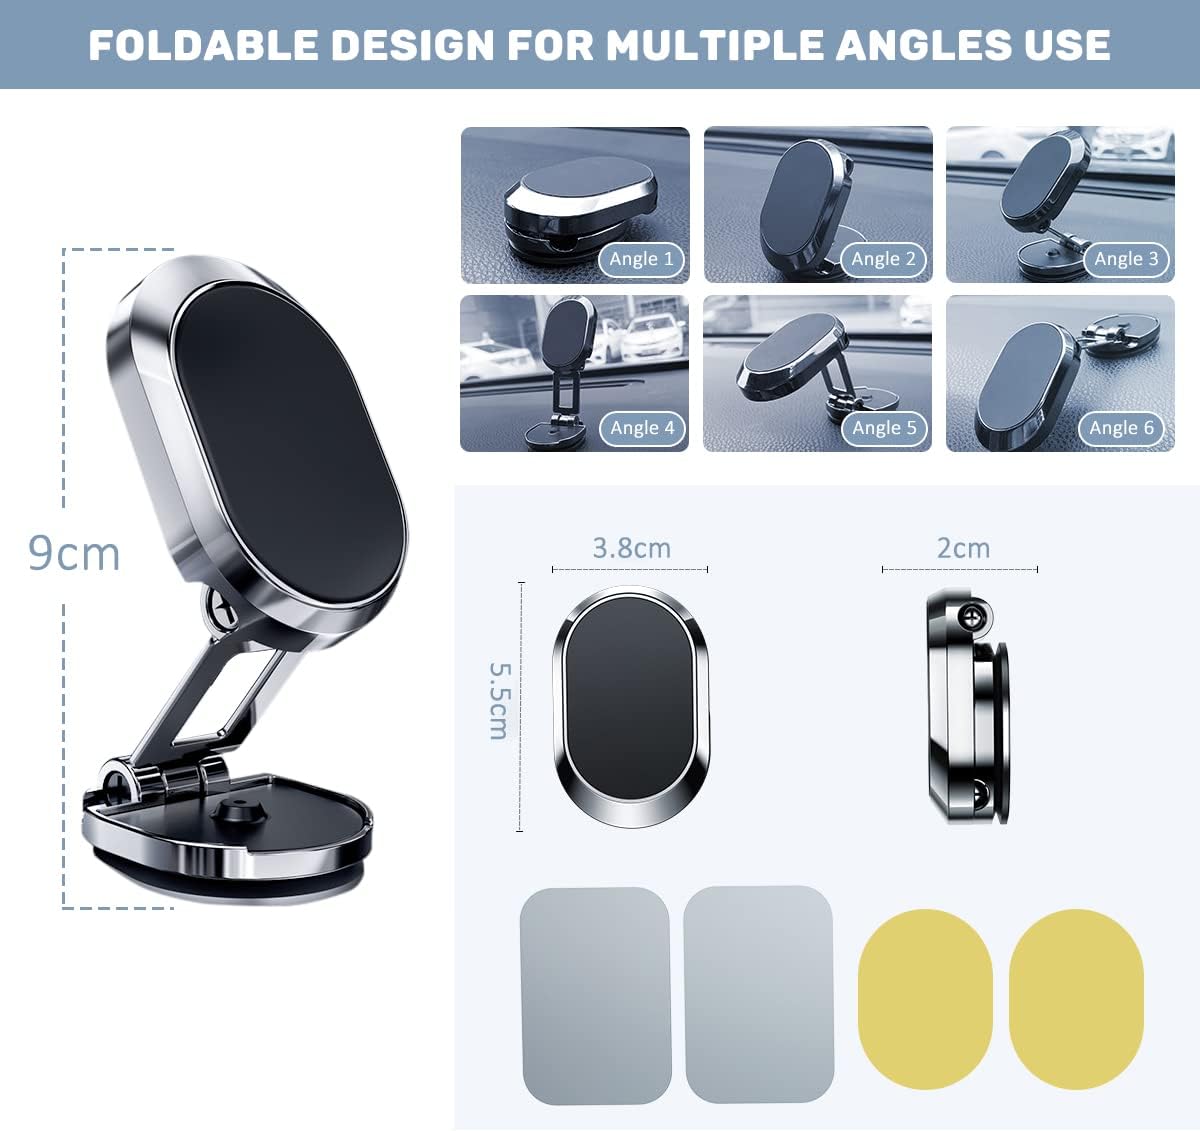 Image shows the size and angle of Car Mobile Phone Holder along with magnetic sticker 